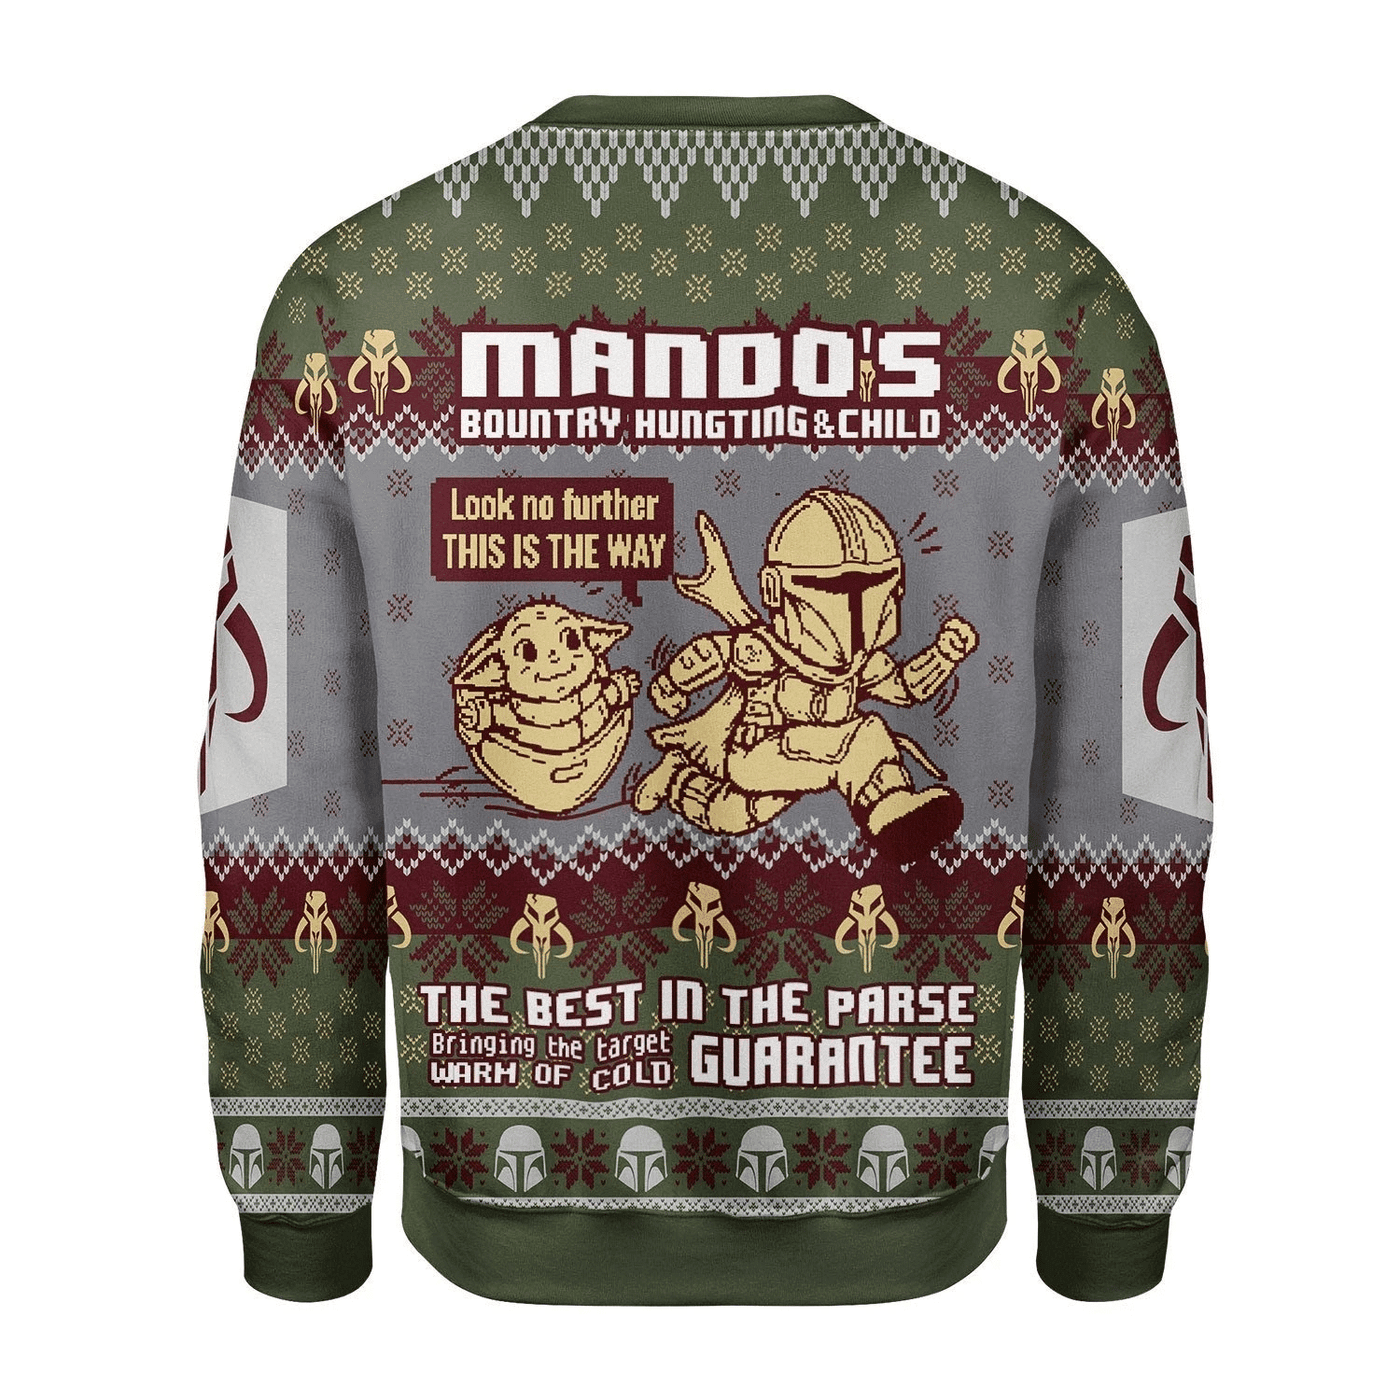 Star Wars Star Wars Mando's Bountry Hunting - Sweater - Ugly Christmas Sweater